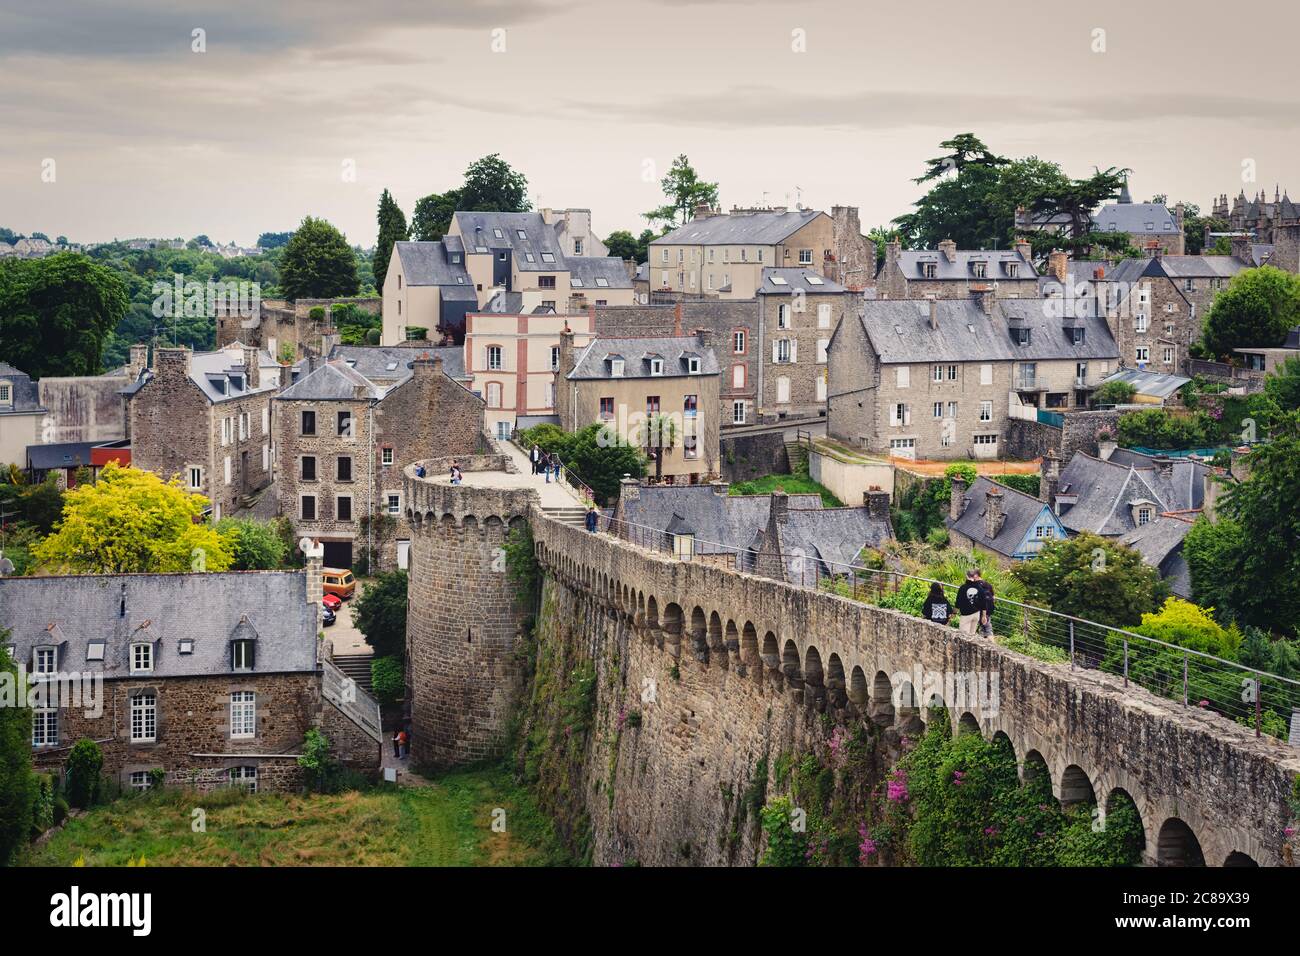 View of the walls and the medieval city of Dinan, Brittany, France Stock Photo